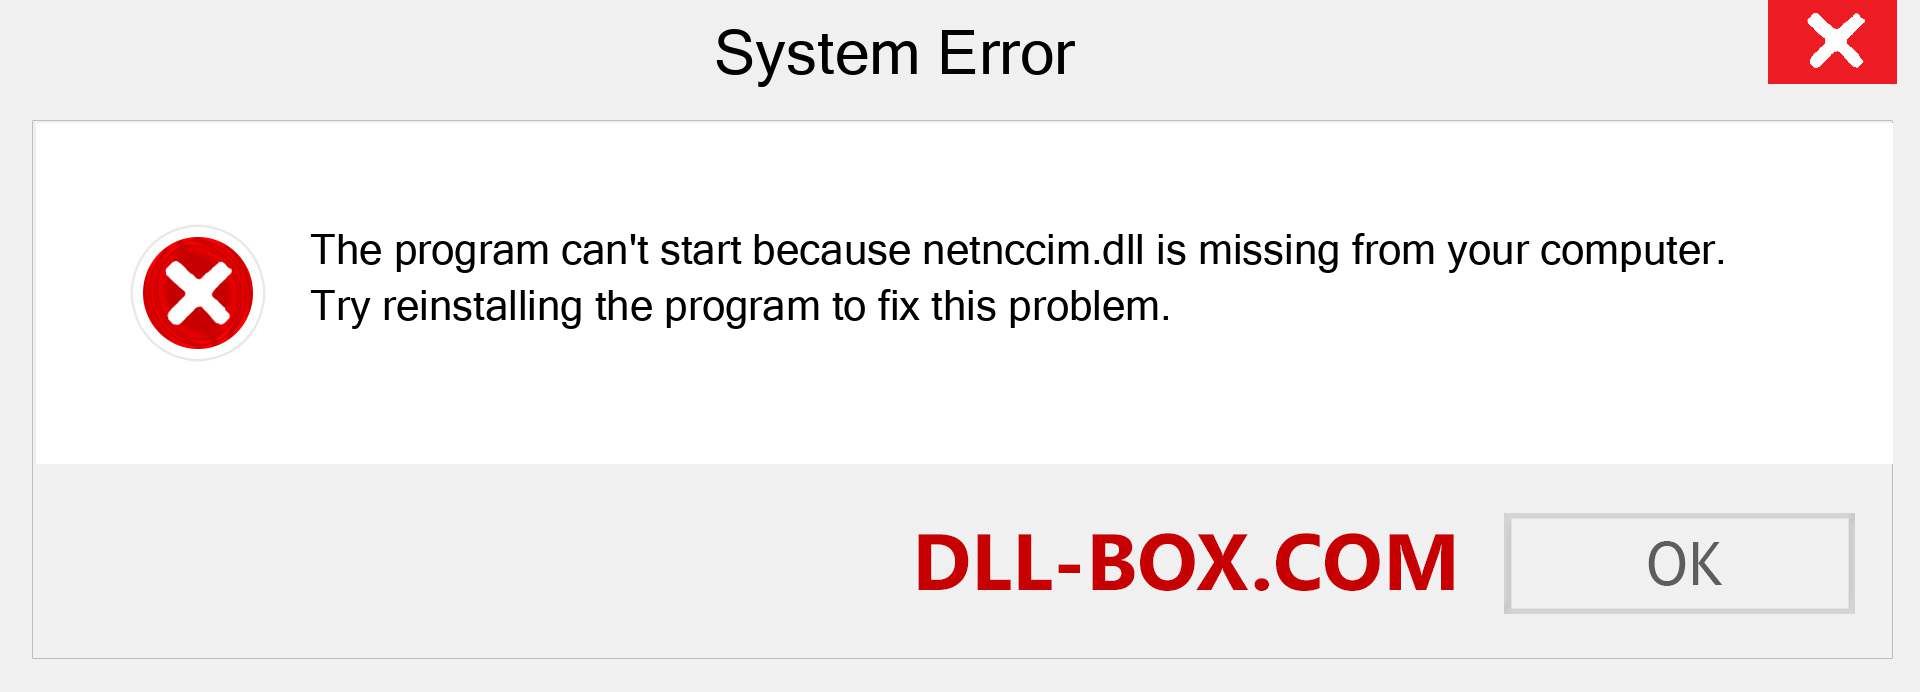  netnccim.dll file is missing?. Download for Windows 7, 8, 10 - Fix  netnccim dll Missing Error on Windows, photos, images